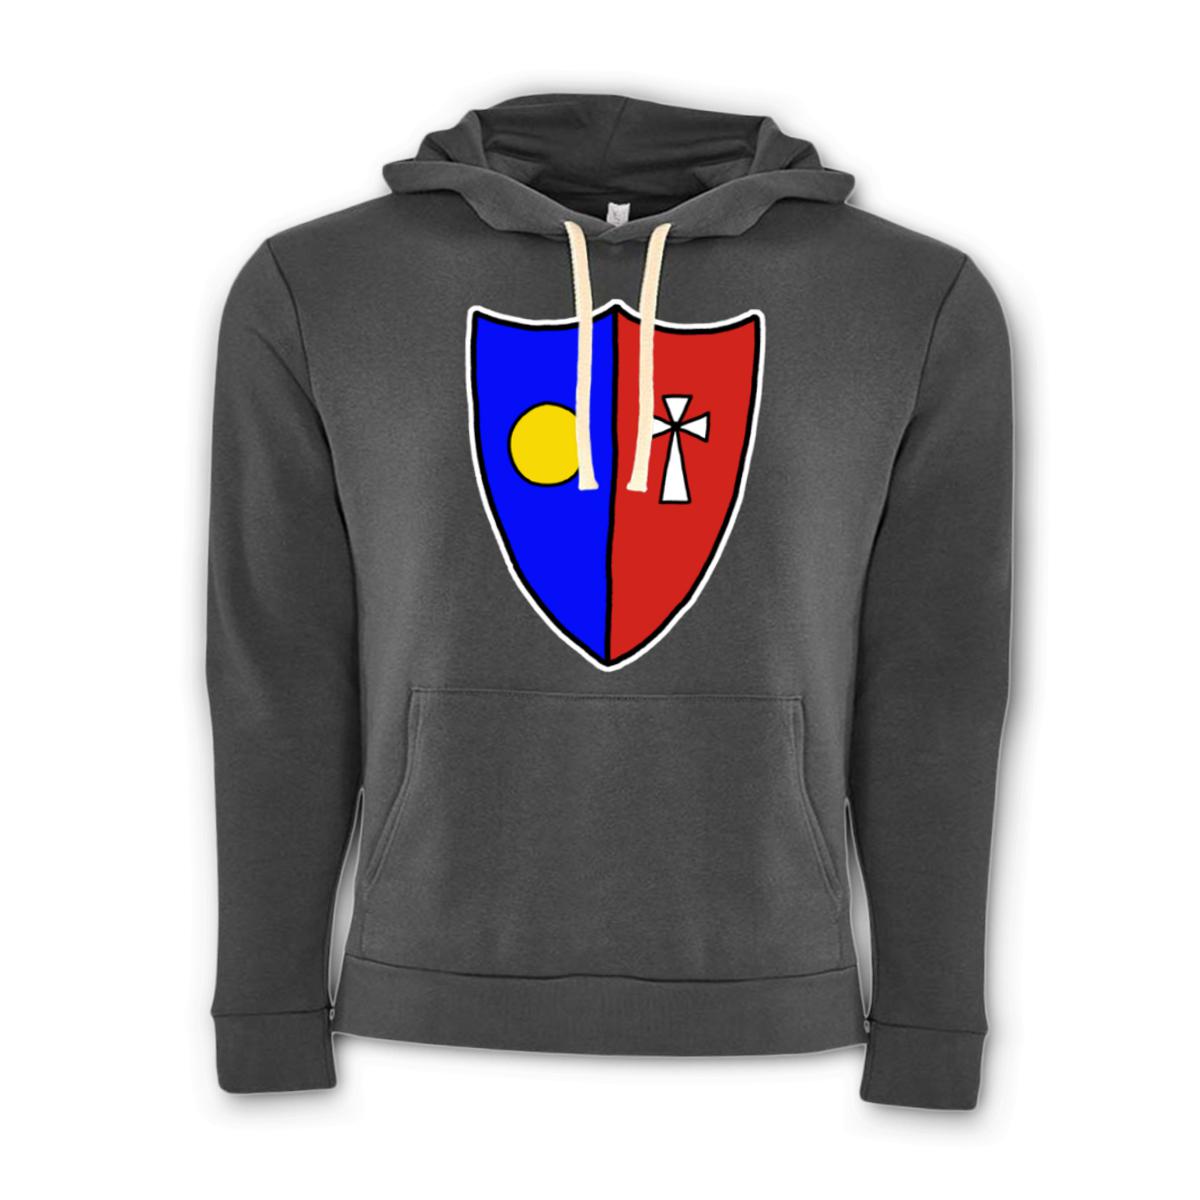 Shield Unisex Pullover Hoodie Small heavy-metal